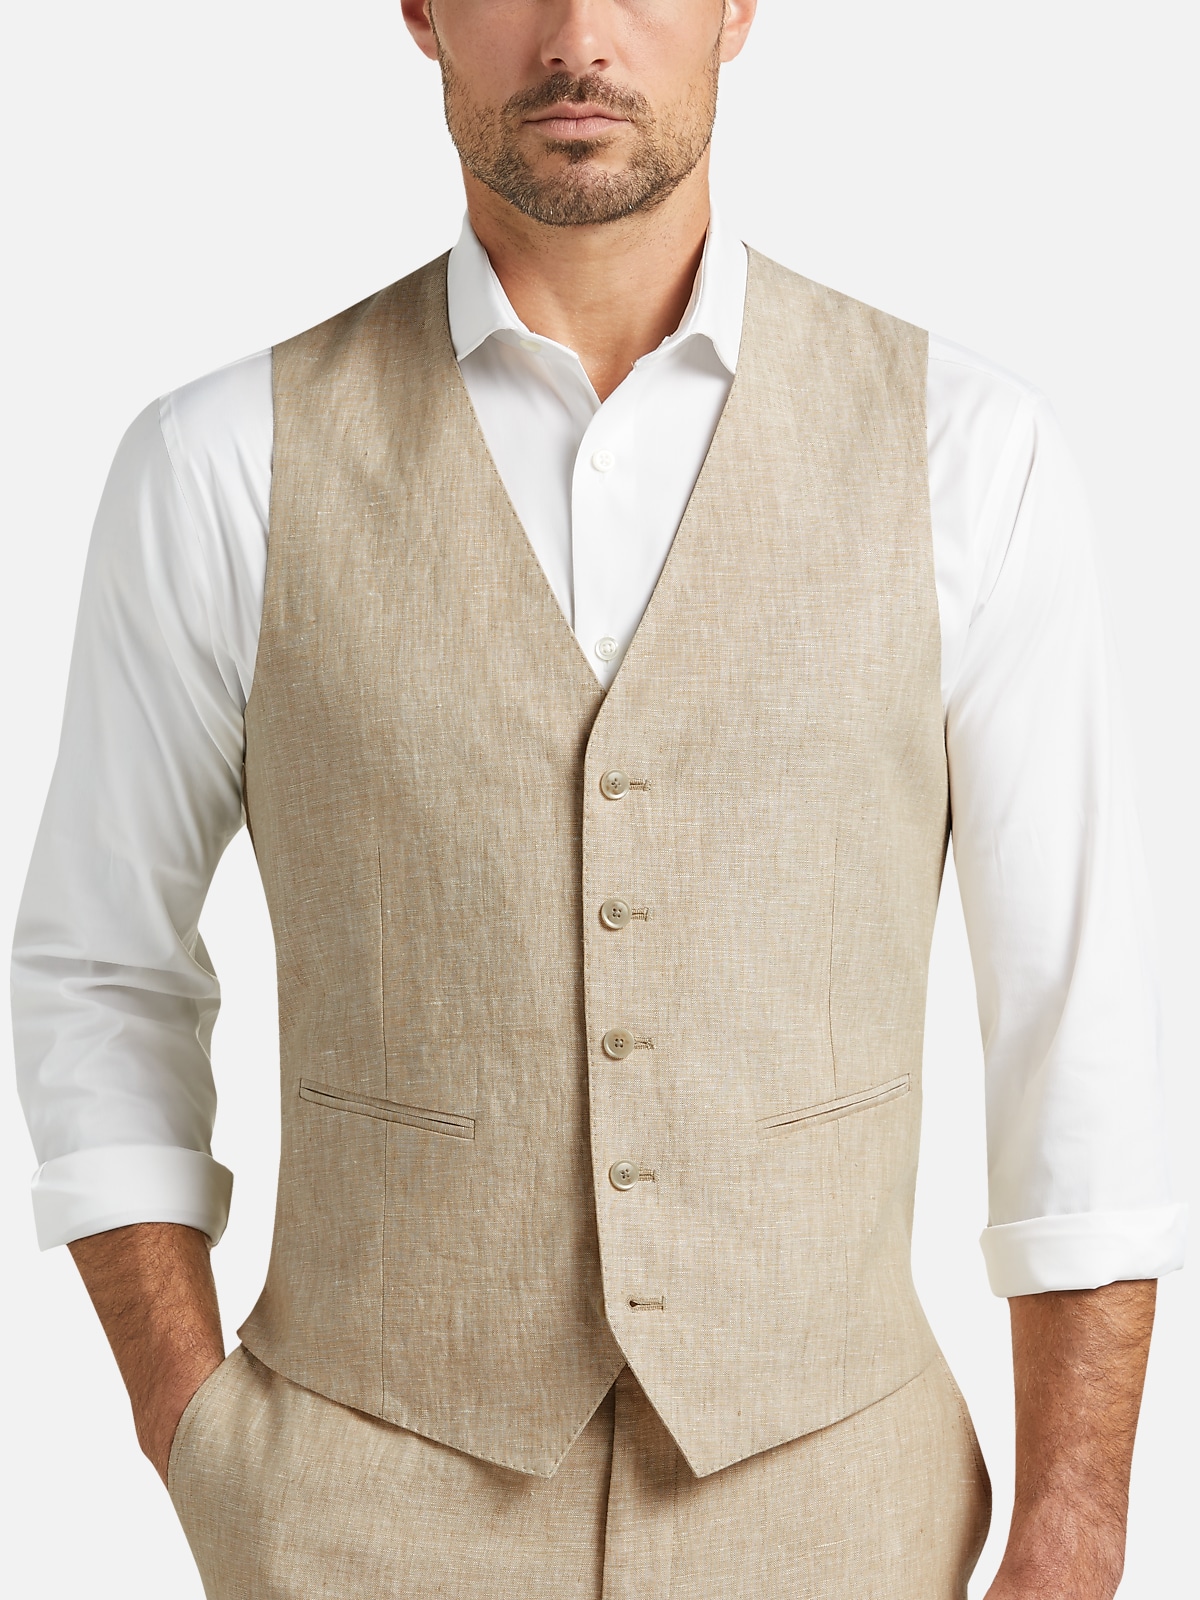 https://image.menswearhouse.com/is/image/TMW/TMW_3RTE_23_JOE_JOSEPH_ABBOUD_SUIT_SEPARATE_VESTS_TAN_CHAMBRAY_MAIN?imPolicy=pdp-zoom-mob